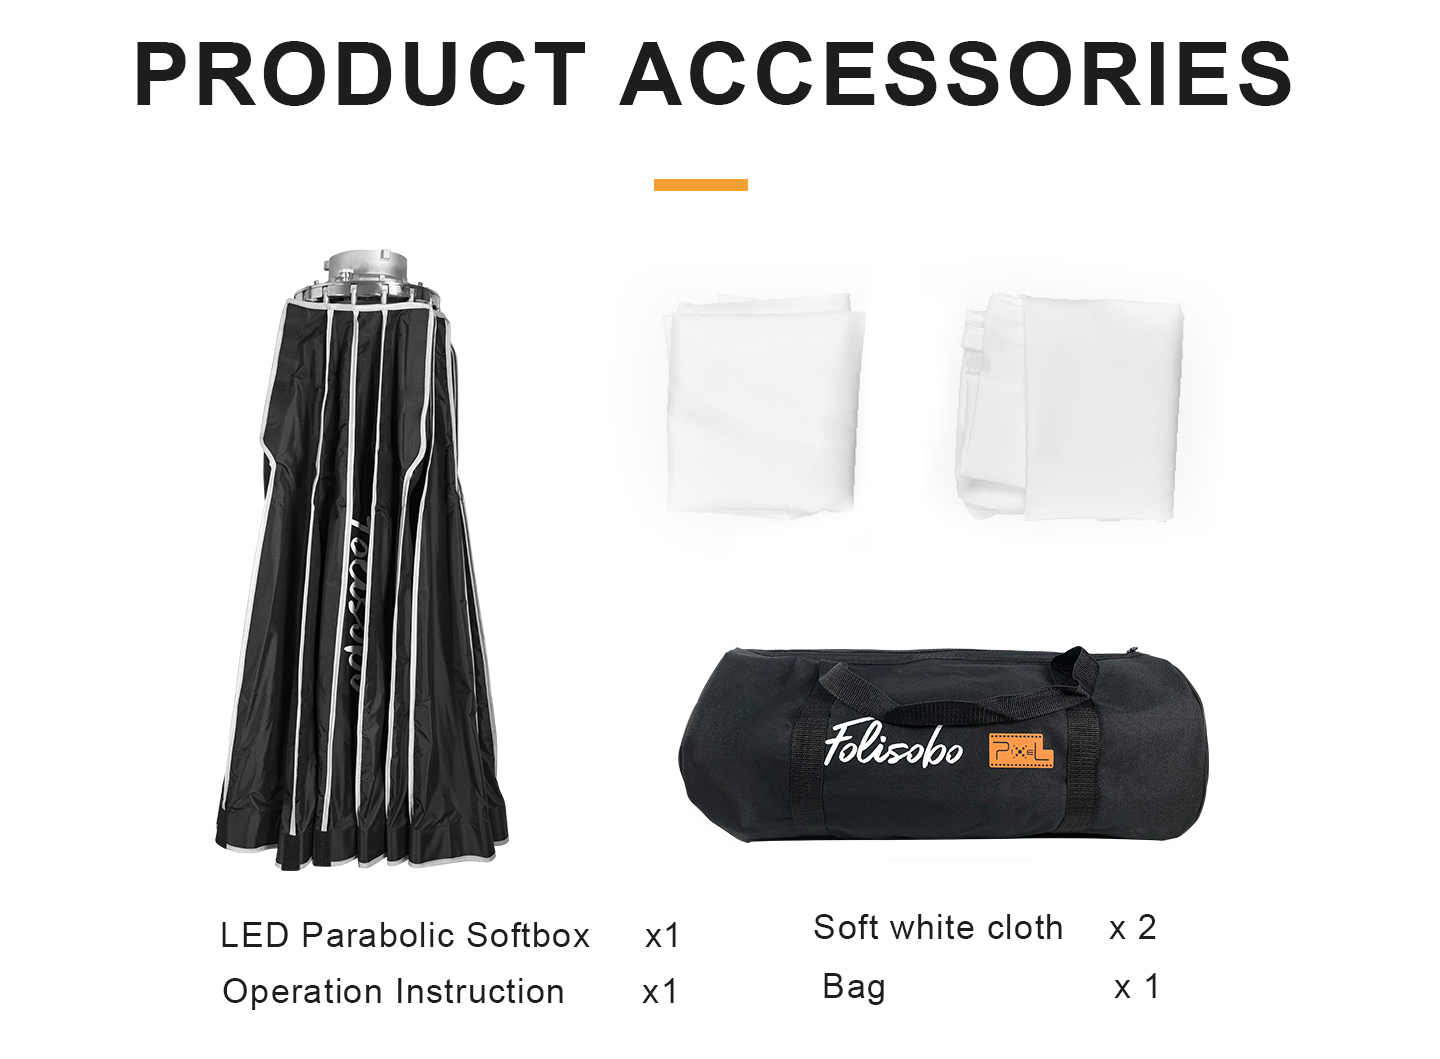 PRODUCT ACCESSORIES